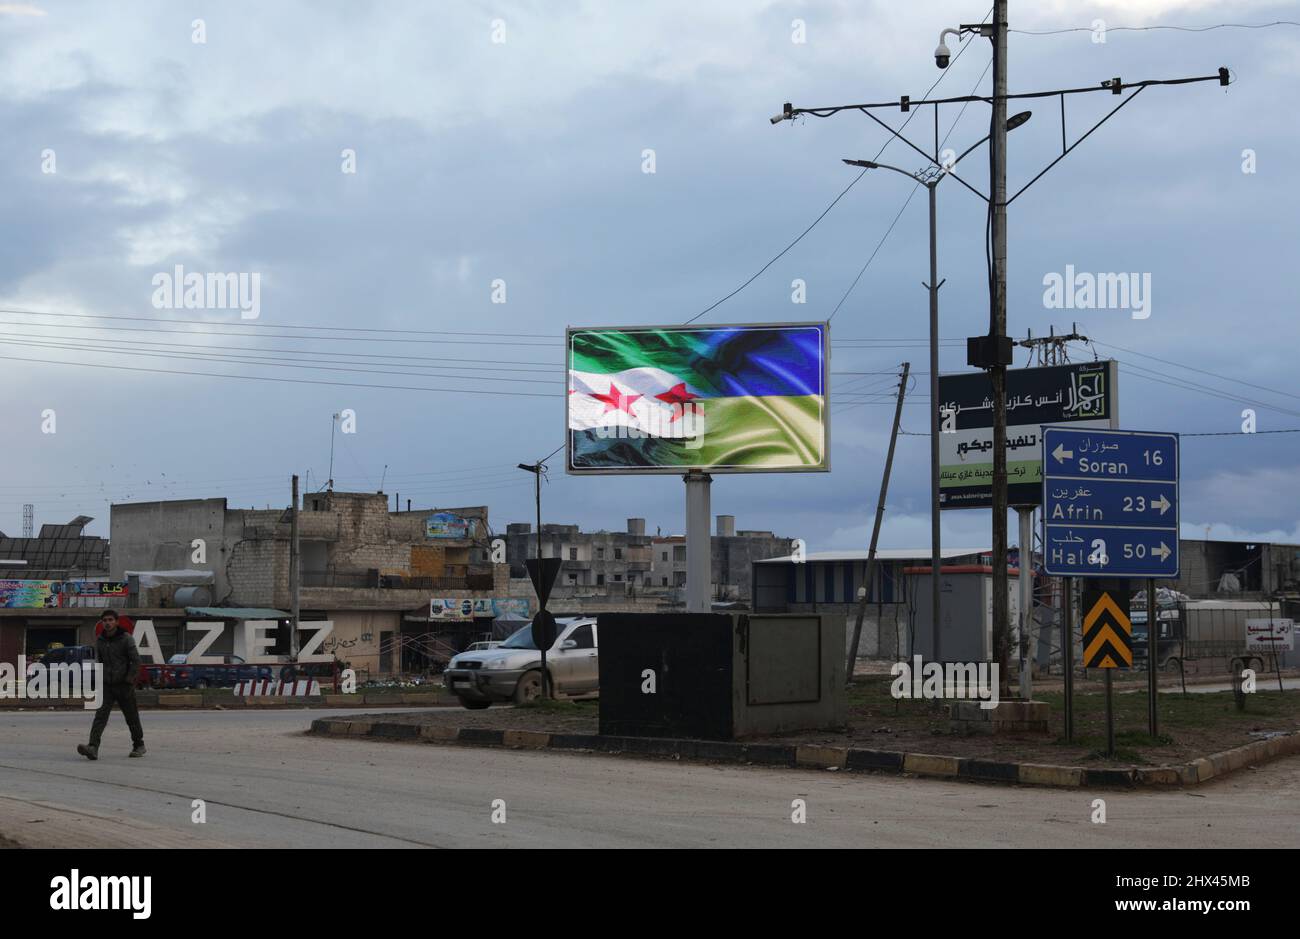 An electronic billboard depicting flags of Syrian opposition and Ukraine, in support of Ukraine amid Russia's invasion, is seen in the rebel-held city of Azaz, Syria March 9, 2022. REUTERS/Khalil Ashawi Stock Photo